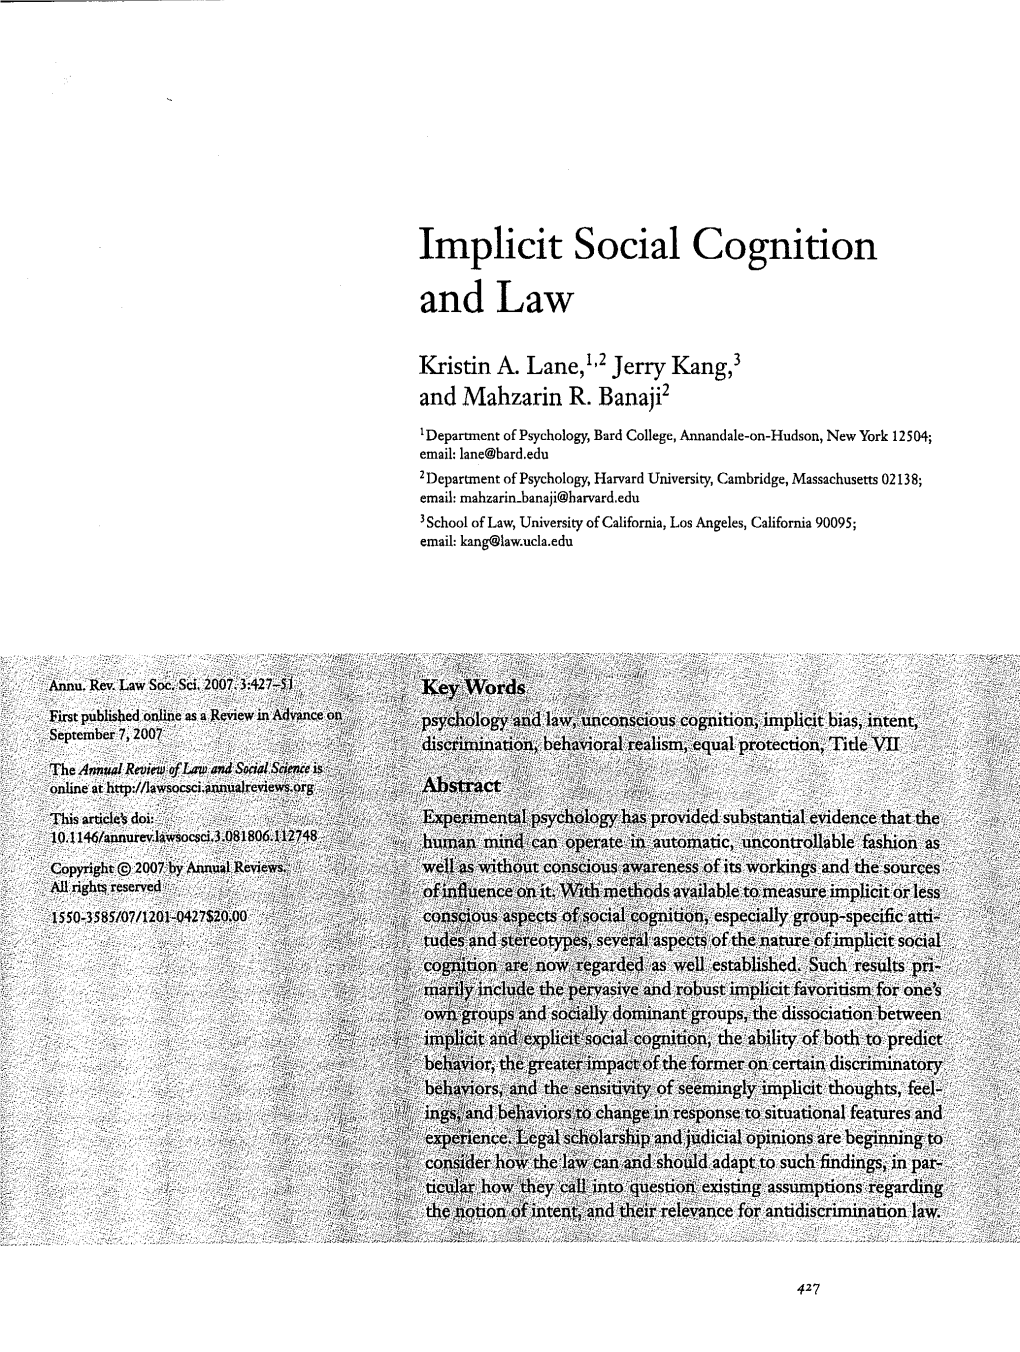 Implicit Social Cognition and Law